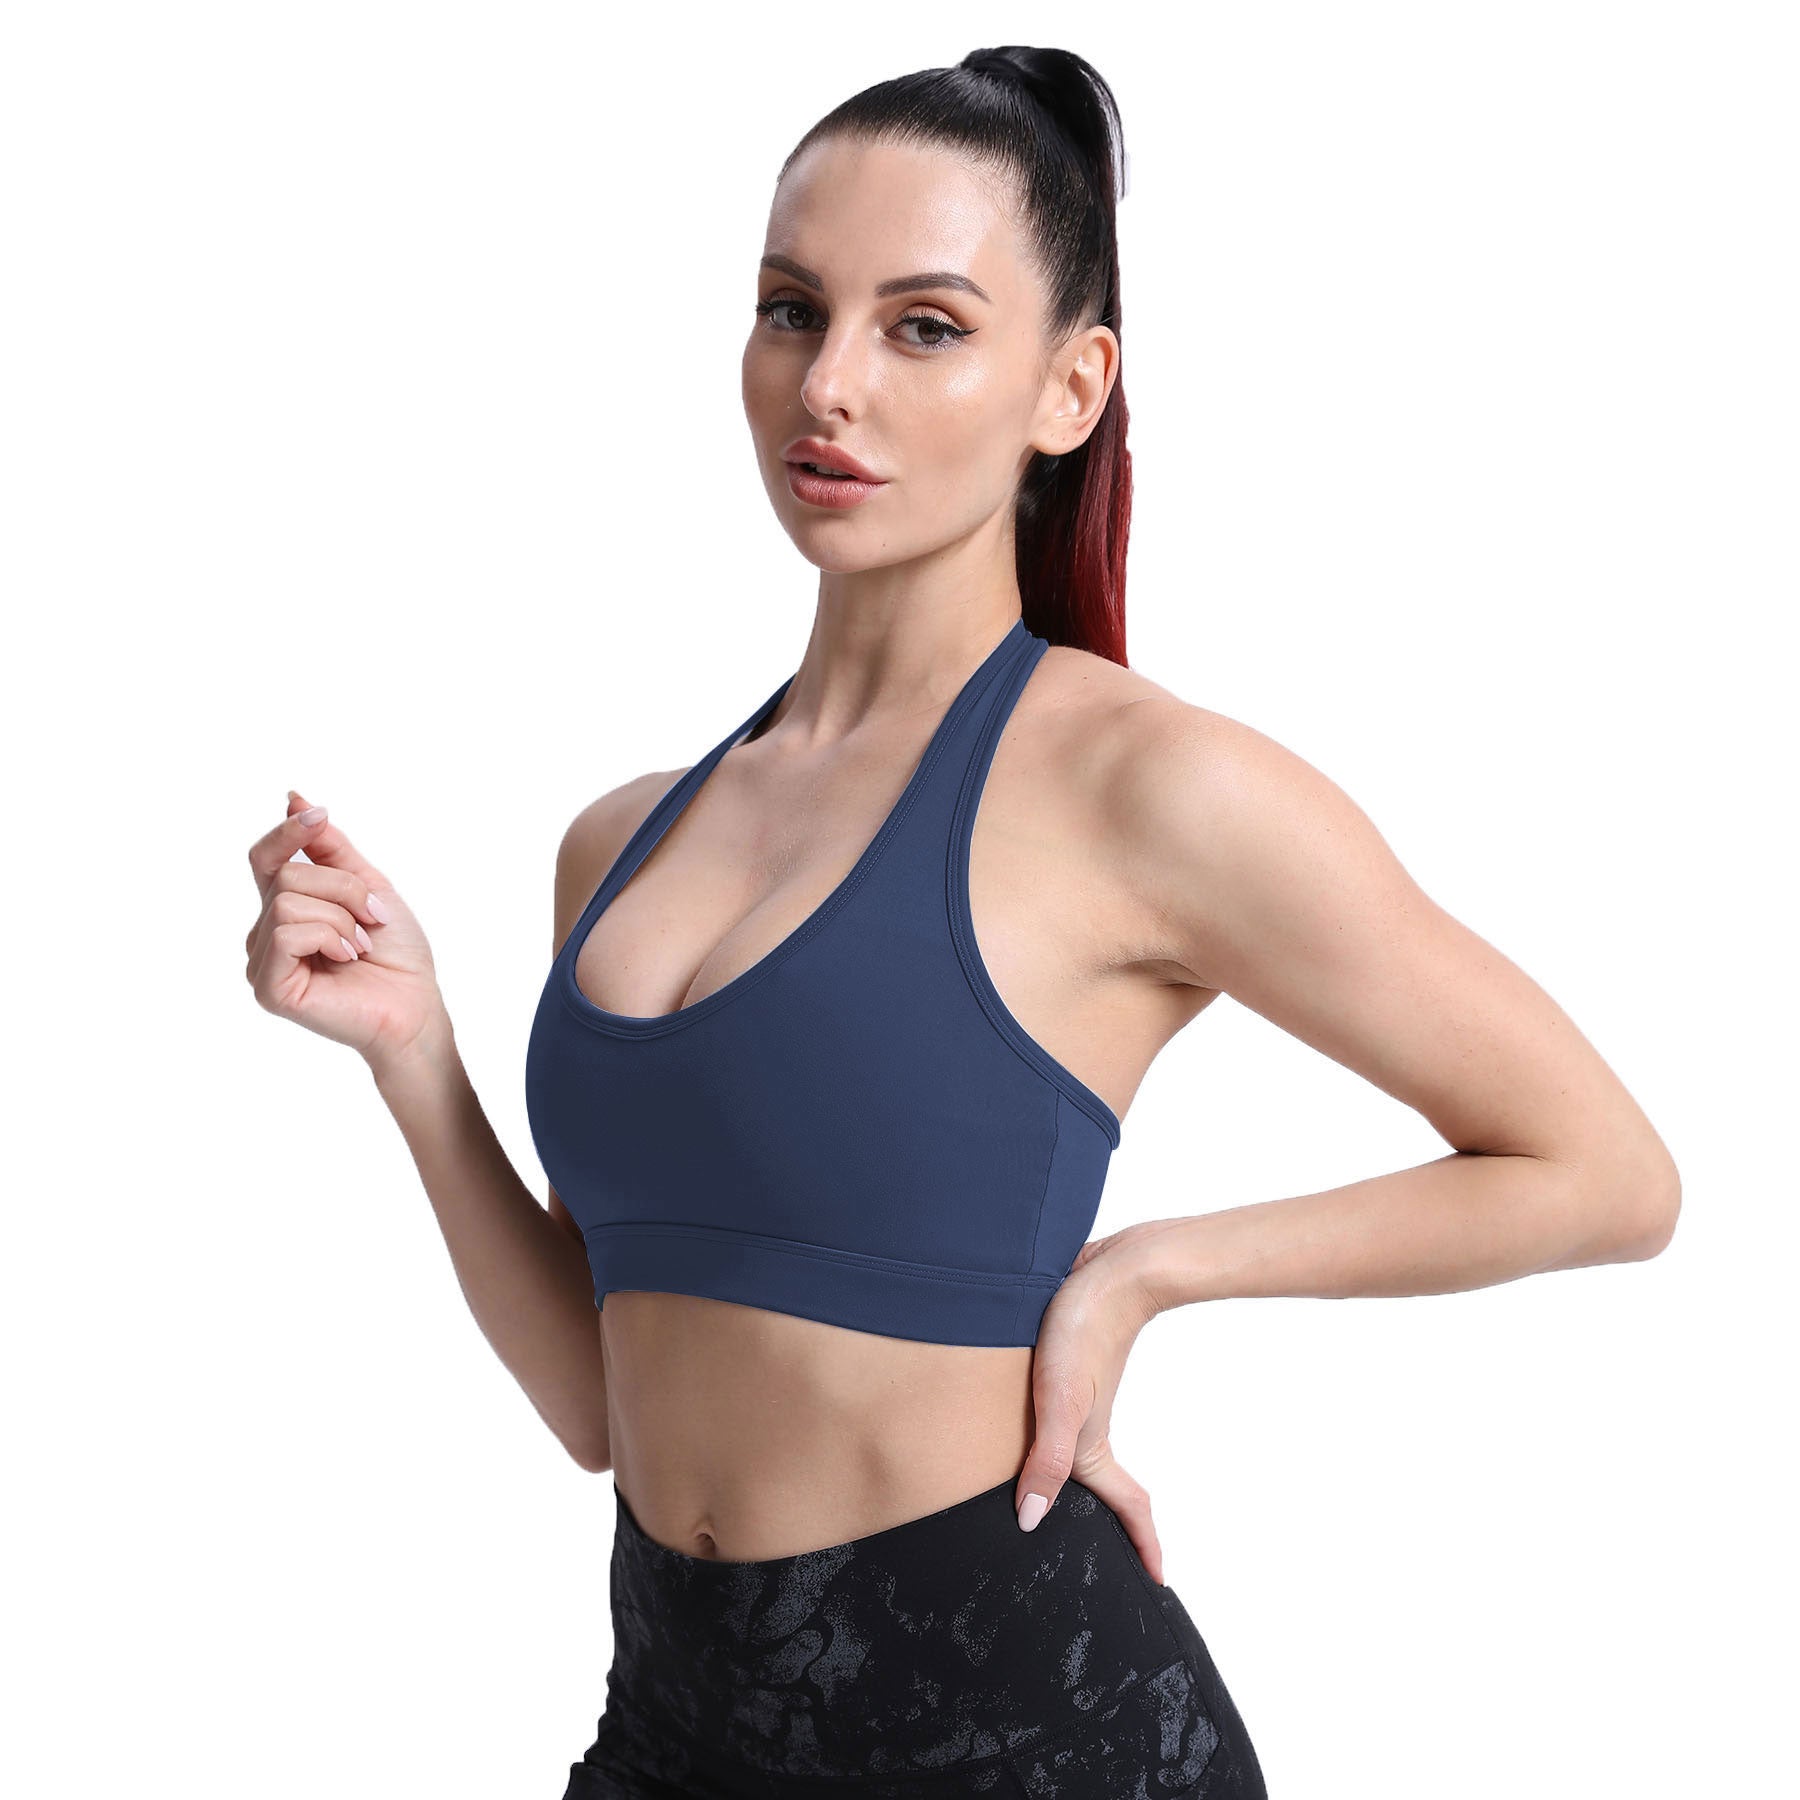 Aueoeo Halter Sports Bra, Cute Bralettes for Women Woman's Solid